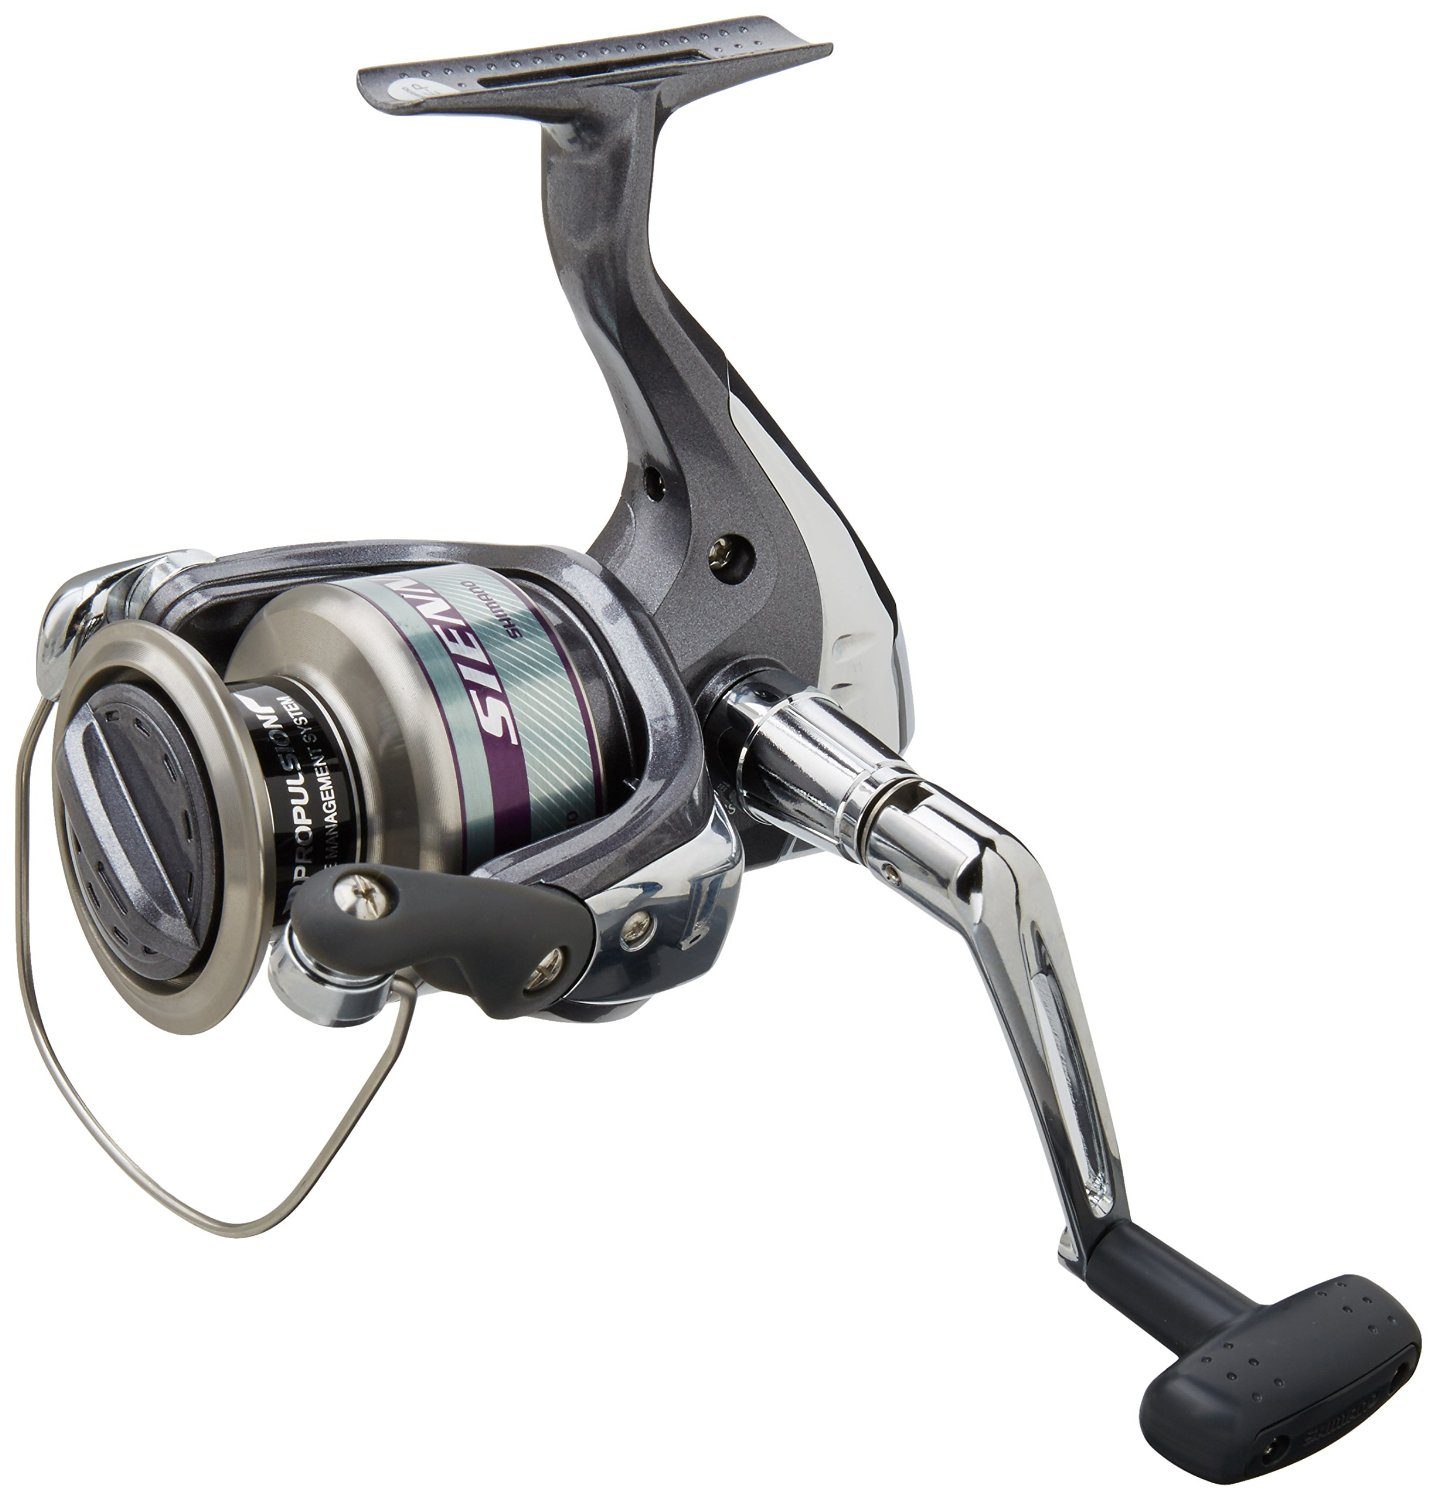 Best Spinning Reel Under $100 Buyer's Guide With Review